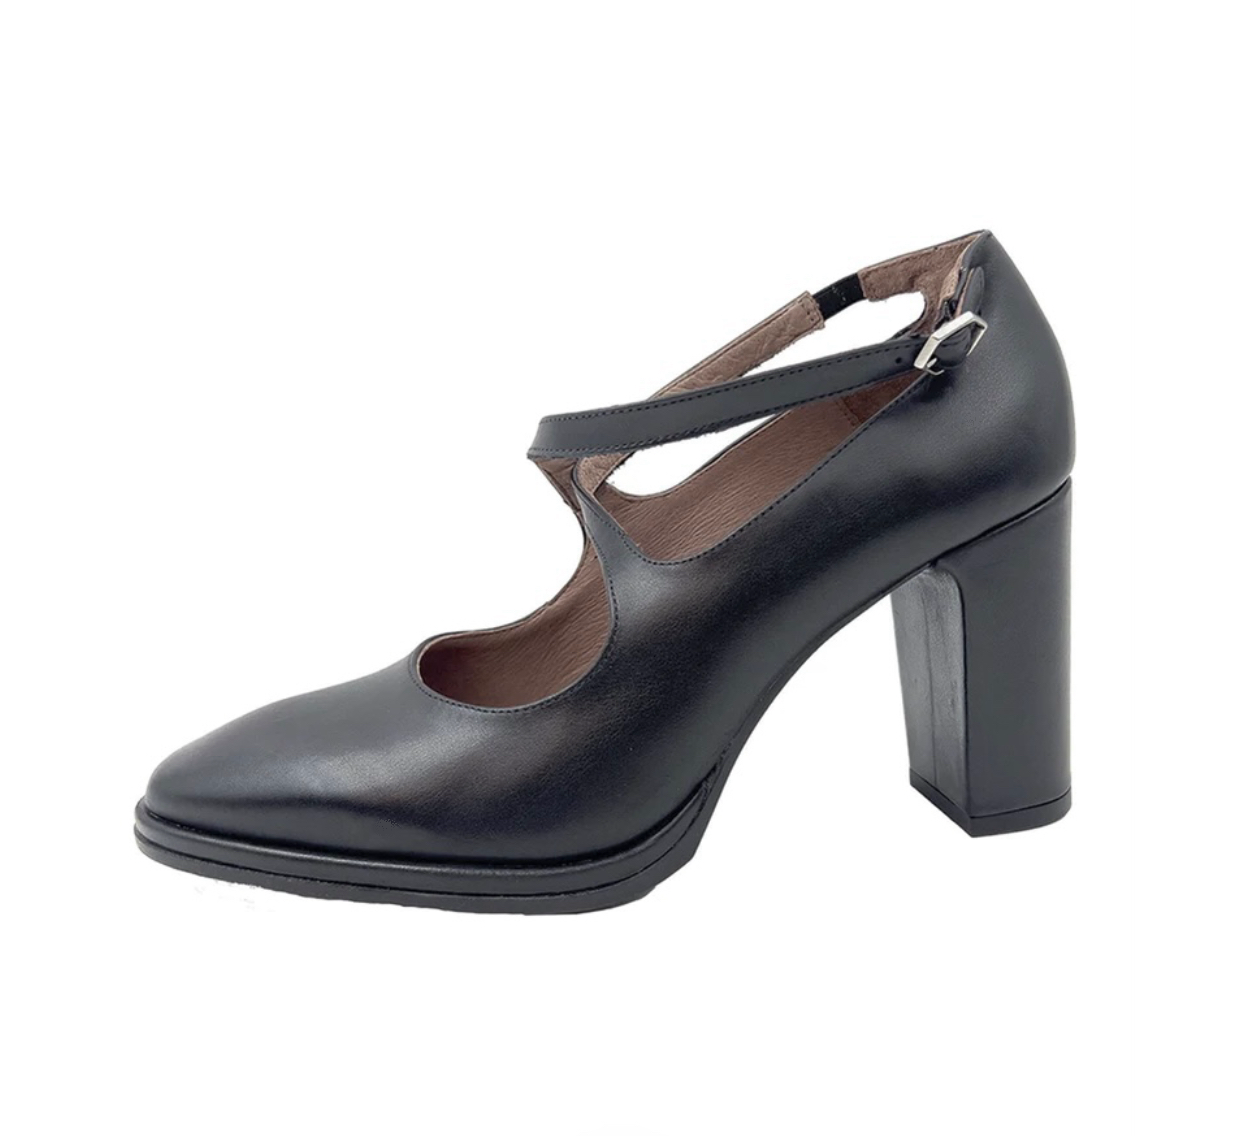 Wonders M-5131 Bora Negro Black Leather Buckle Double Strap Court Shoe Made In Spain